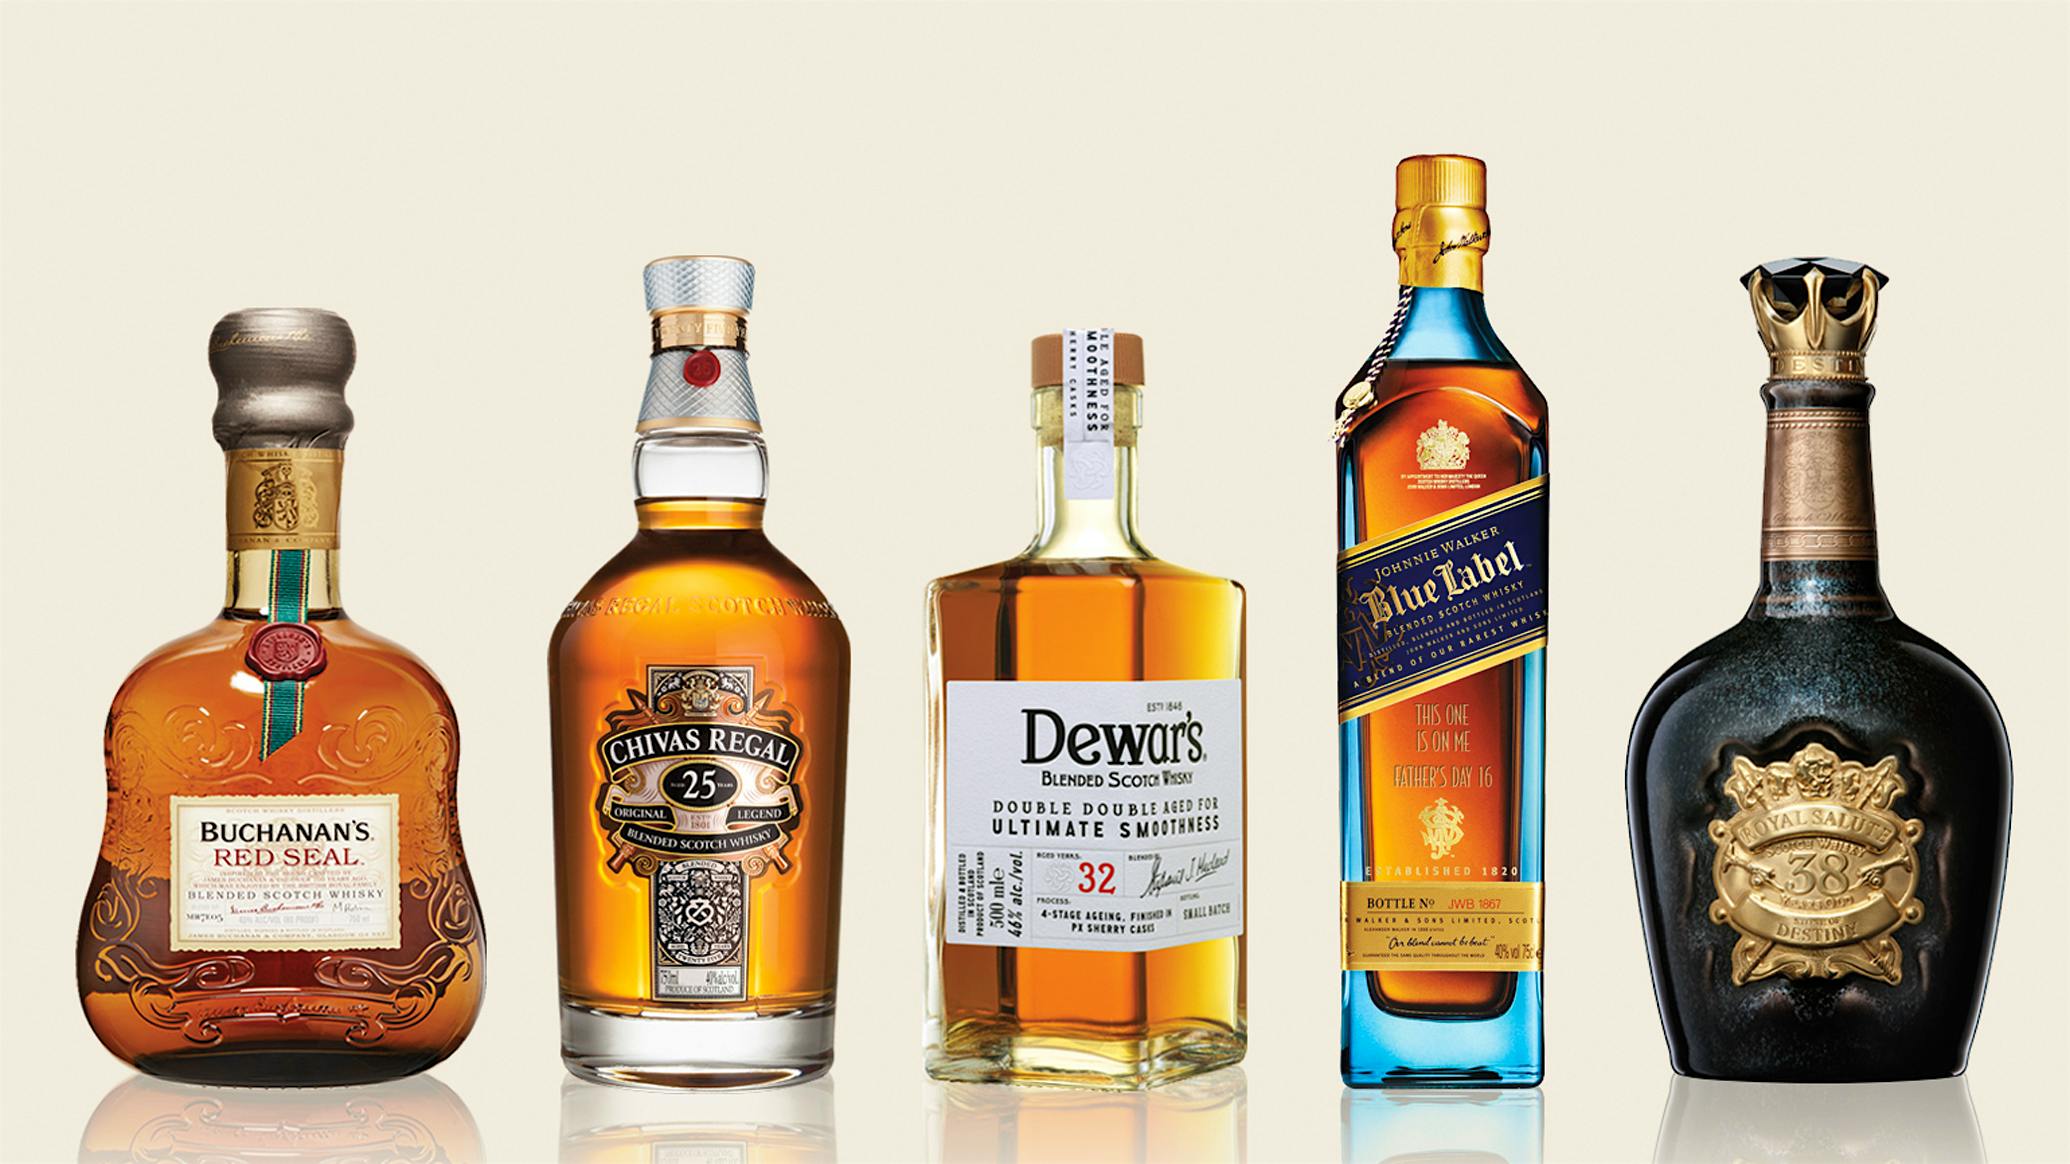 From left to right: Buchanan’s Red Seal, Chivas Regal 25, Dewar’s Double Double 32, Johnnie Walker Blue and Royal Salute.